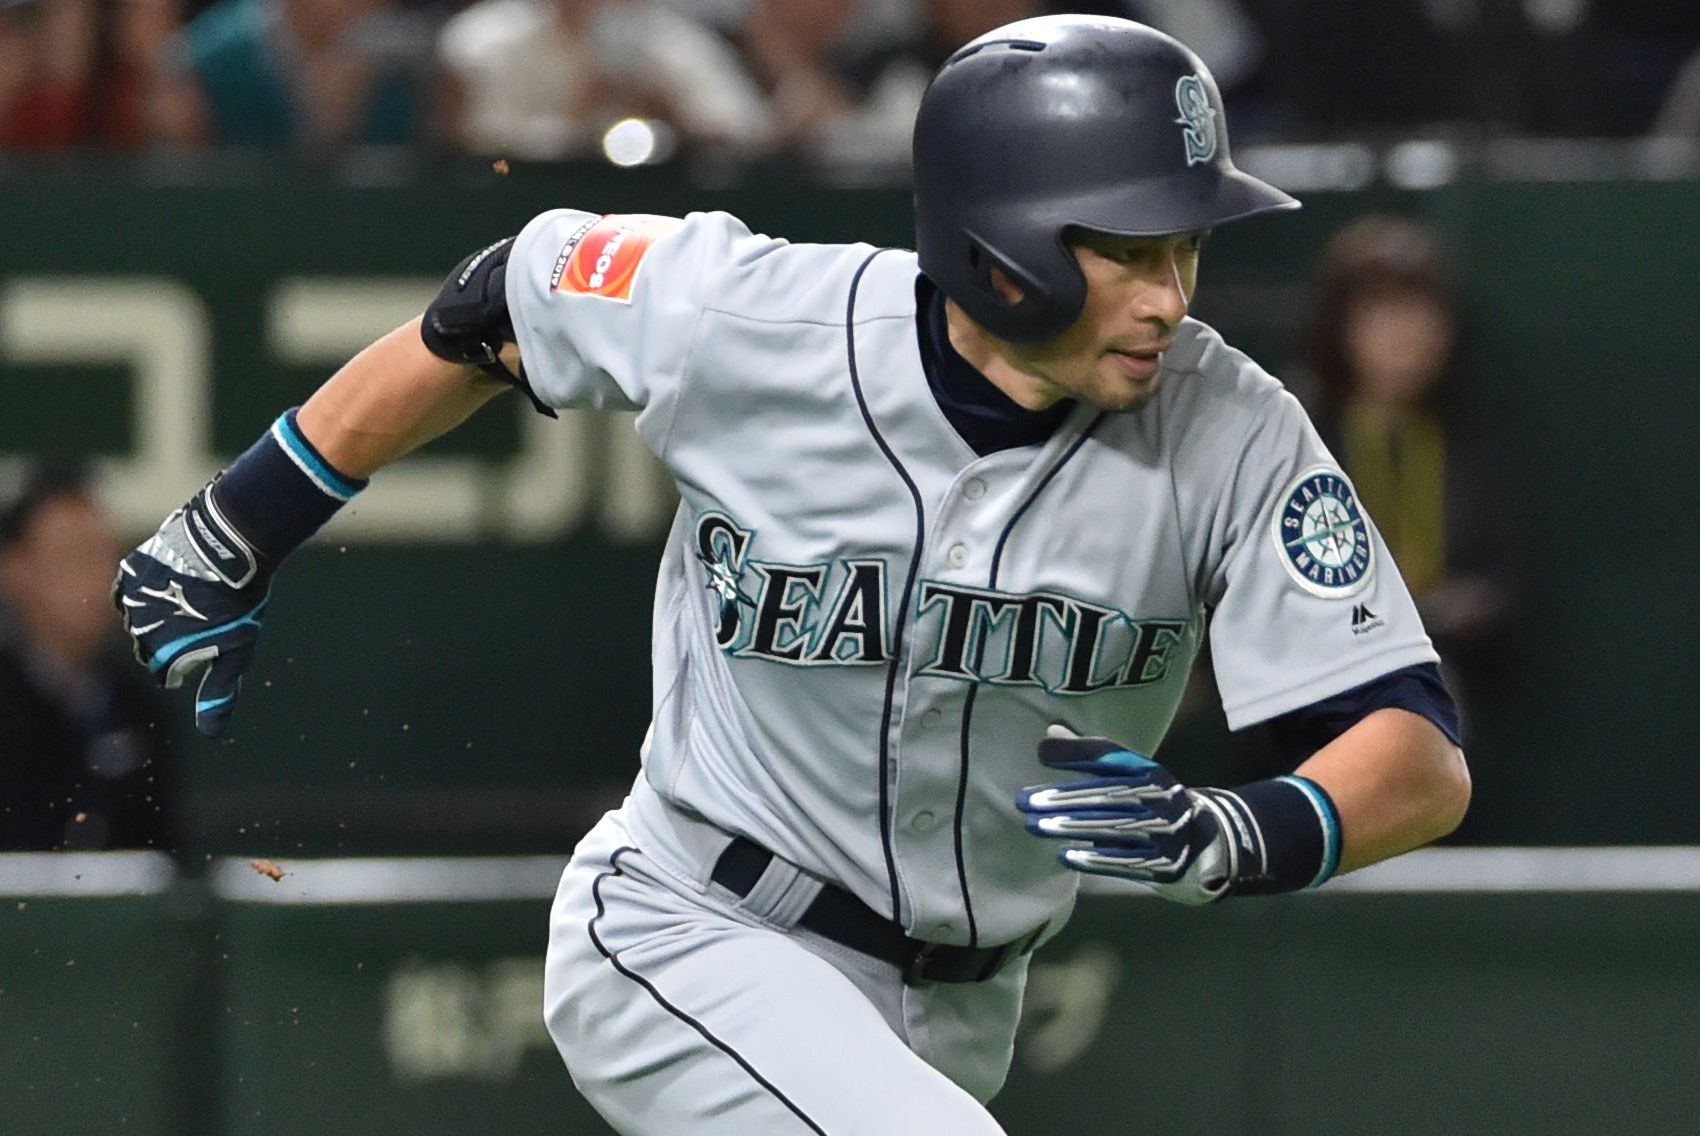 Ichiro Suzuki Retires From Baseball After Two-Game Series For